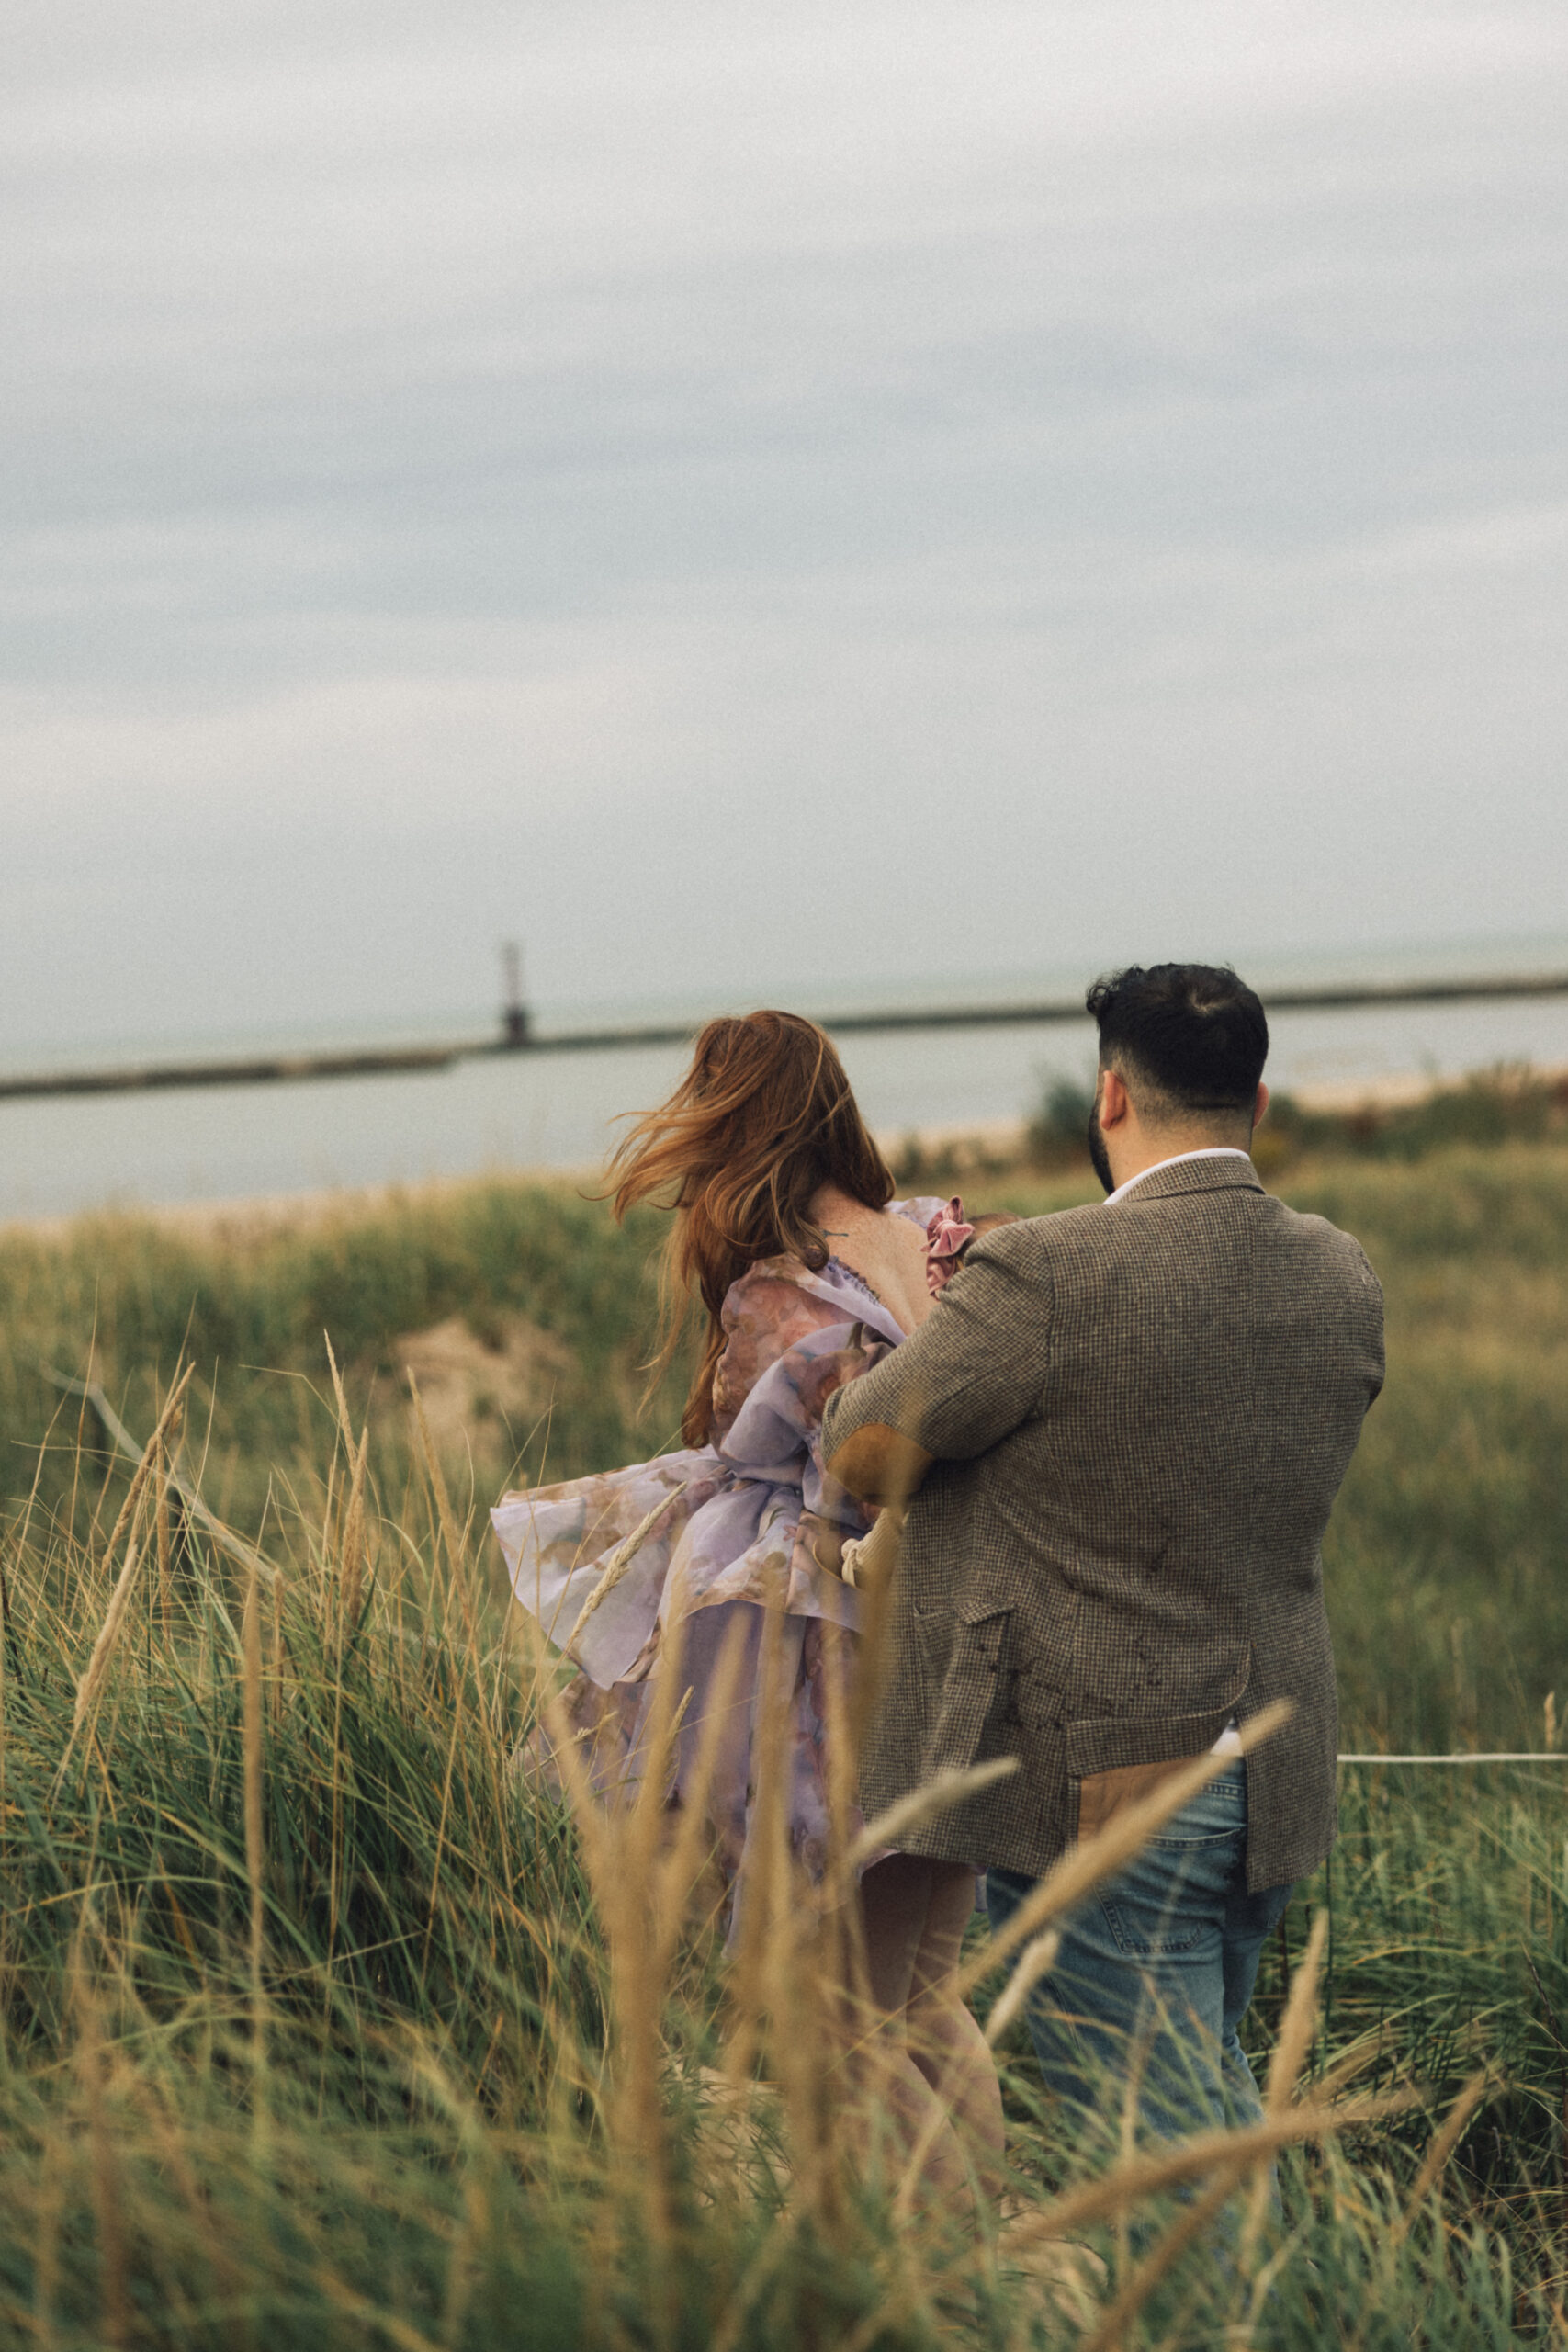 Kenice & Joey welcomed their daughter Naomi in the summer and we took to Lake Michigan on a beautiful, breezy fall afternoon. At this whimsical Chicago family beach session, we documented organic, sweet moments as golden hour arrived